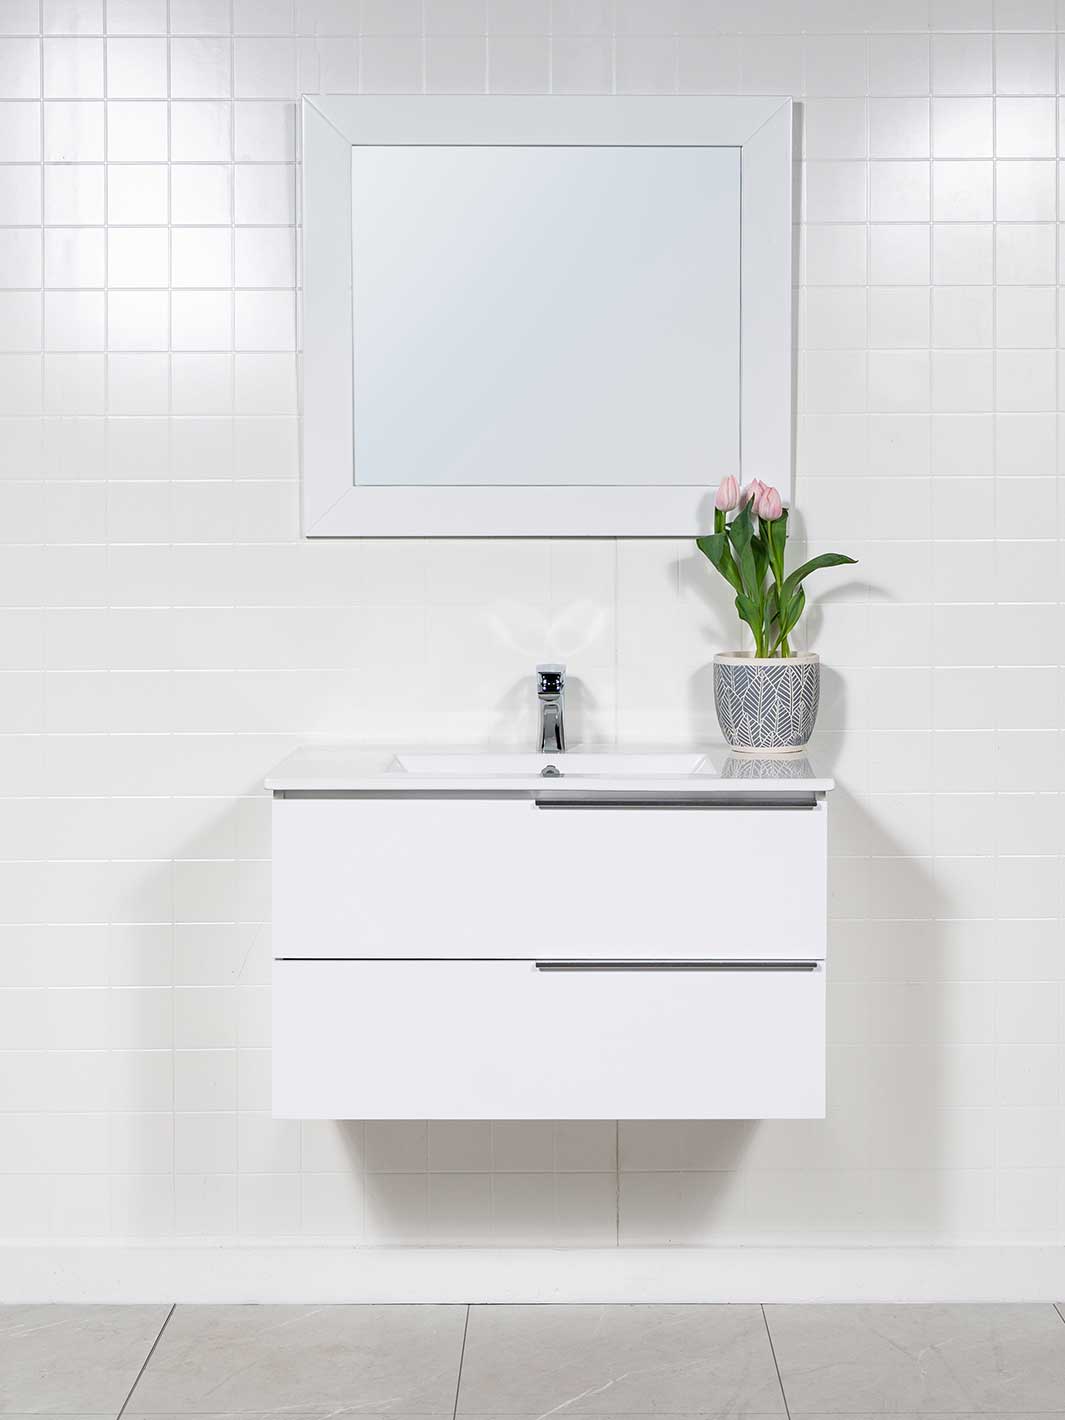 Wall mounted vanity in white. It has two drawers and a single piece ceramic sink